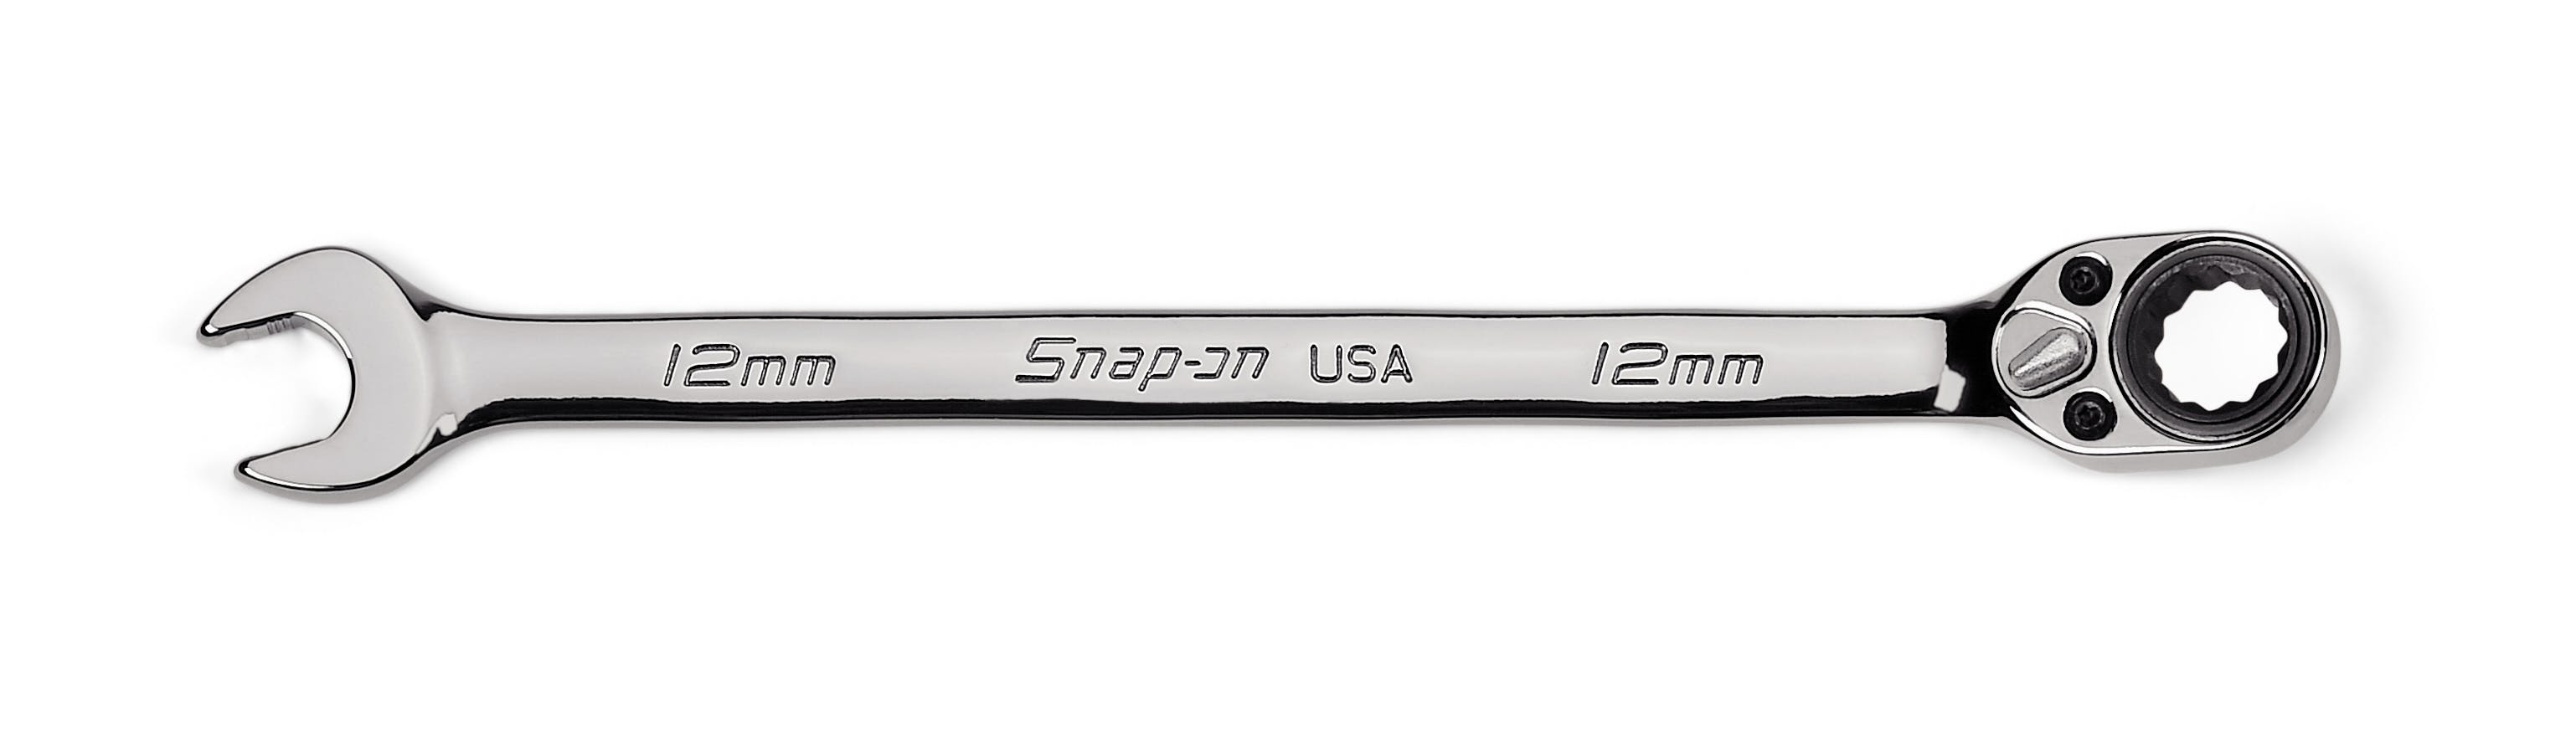 Snap-on 12 Mm 12-point Flank Drive Plus Reversible Ratcheting Wrench SOXRRM12 for sale online 